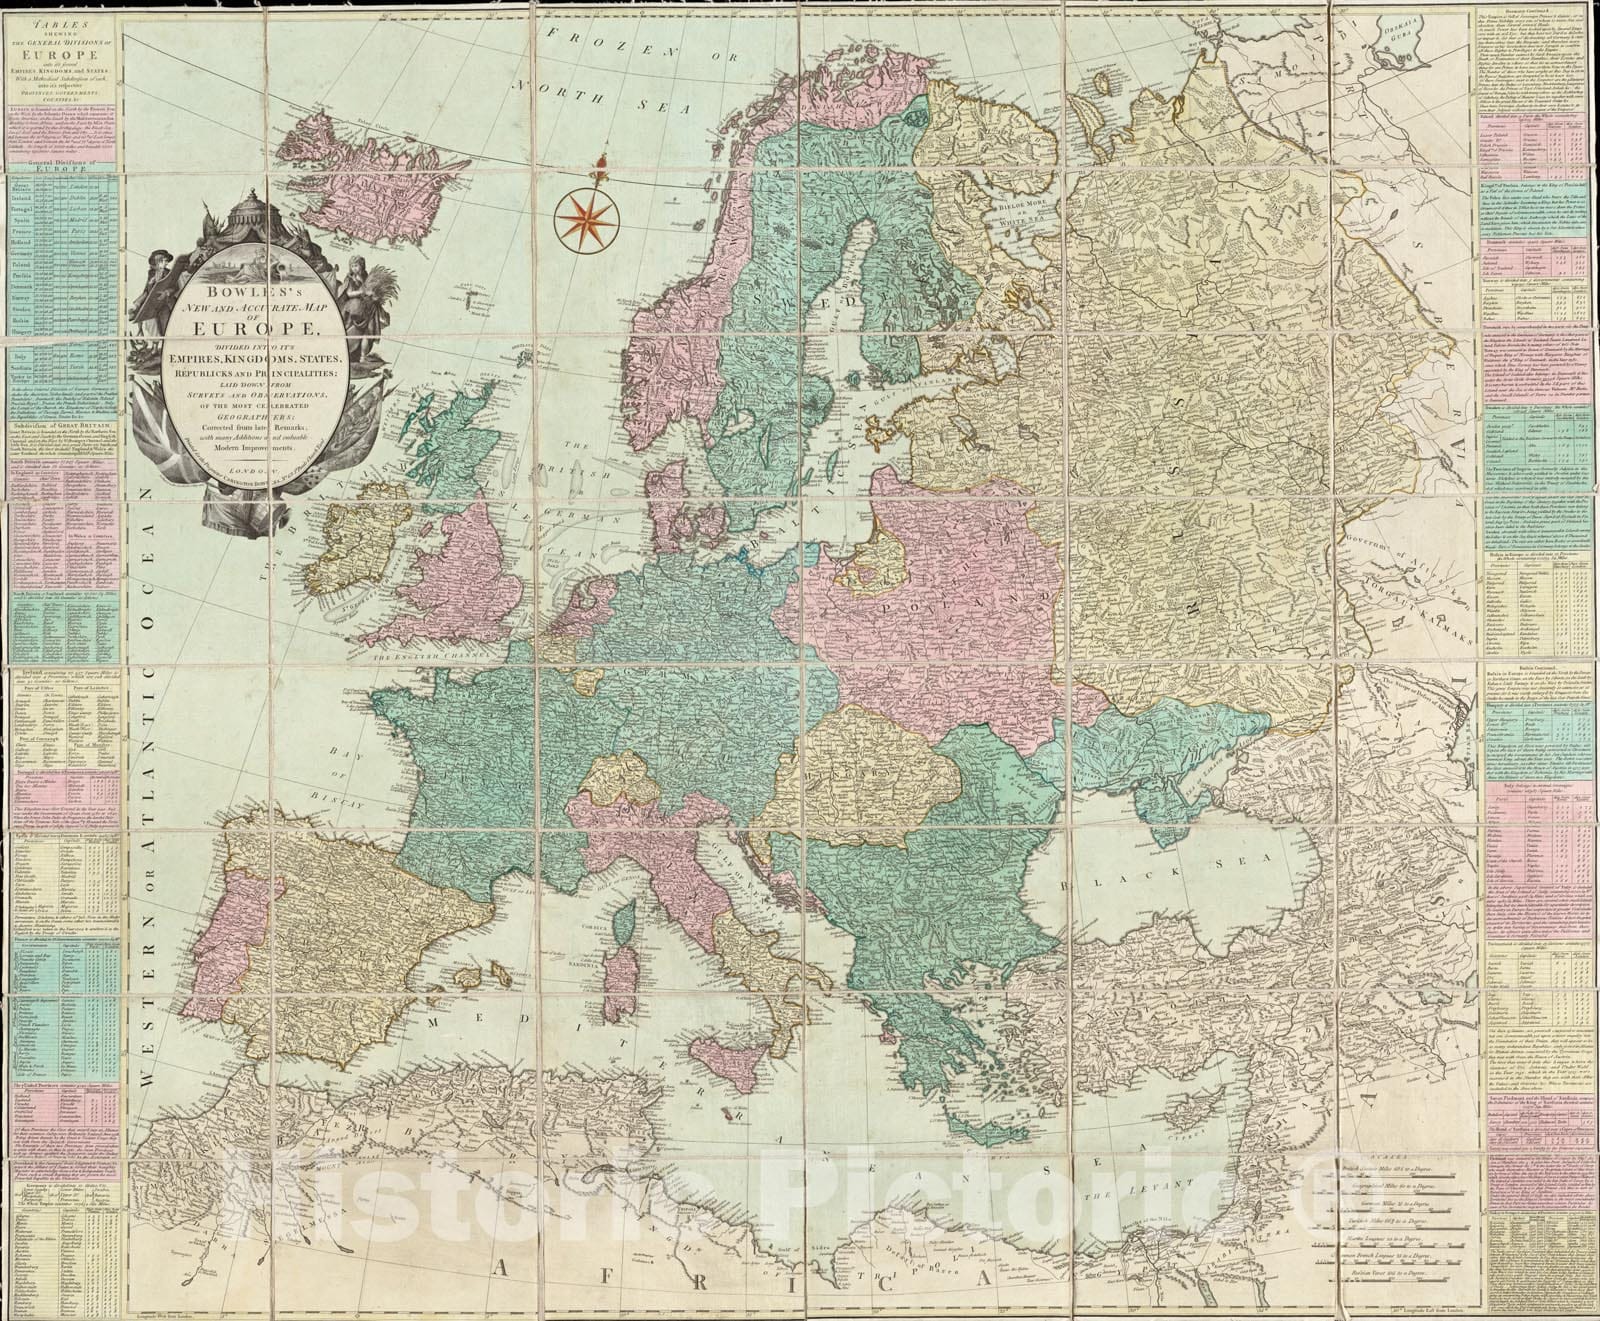 Historical Map, 1785 Bowles's New and Accurate map of Europe, Divided into It's [sic] Empires, Kingdoms, States, republicks and Principalities, Vintage Wall Art